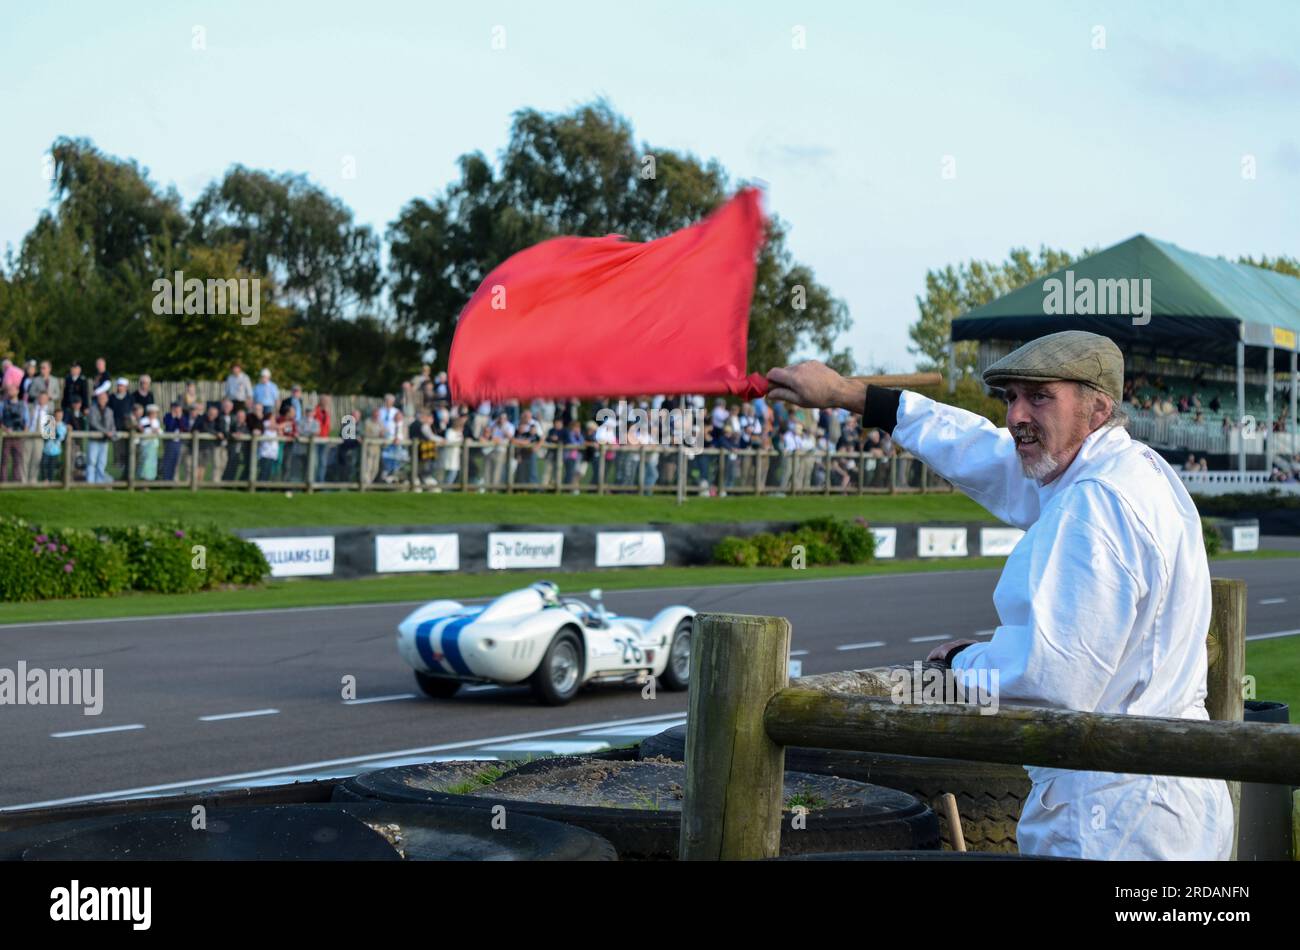 Red flag waved by trackside marshal at the Goodwood Revival vintage motorsport event, West Sussex, UK. Race session stopped Stock Photo